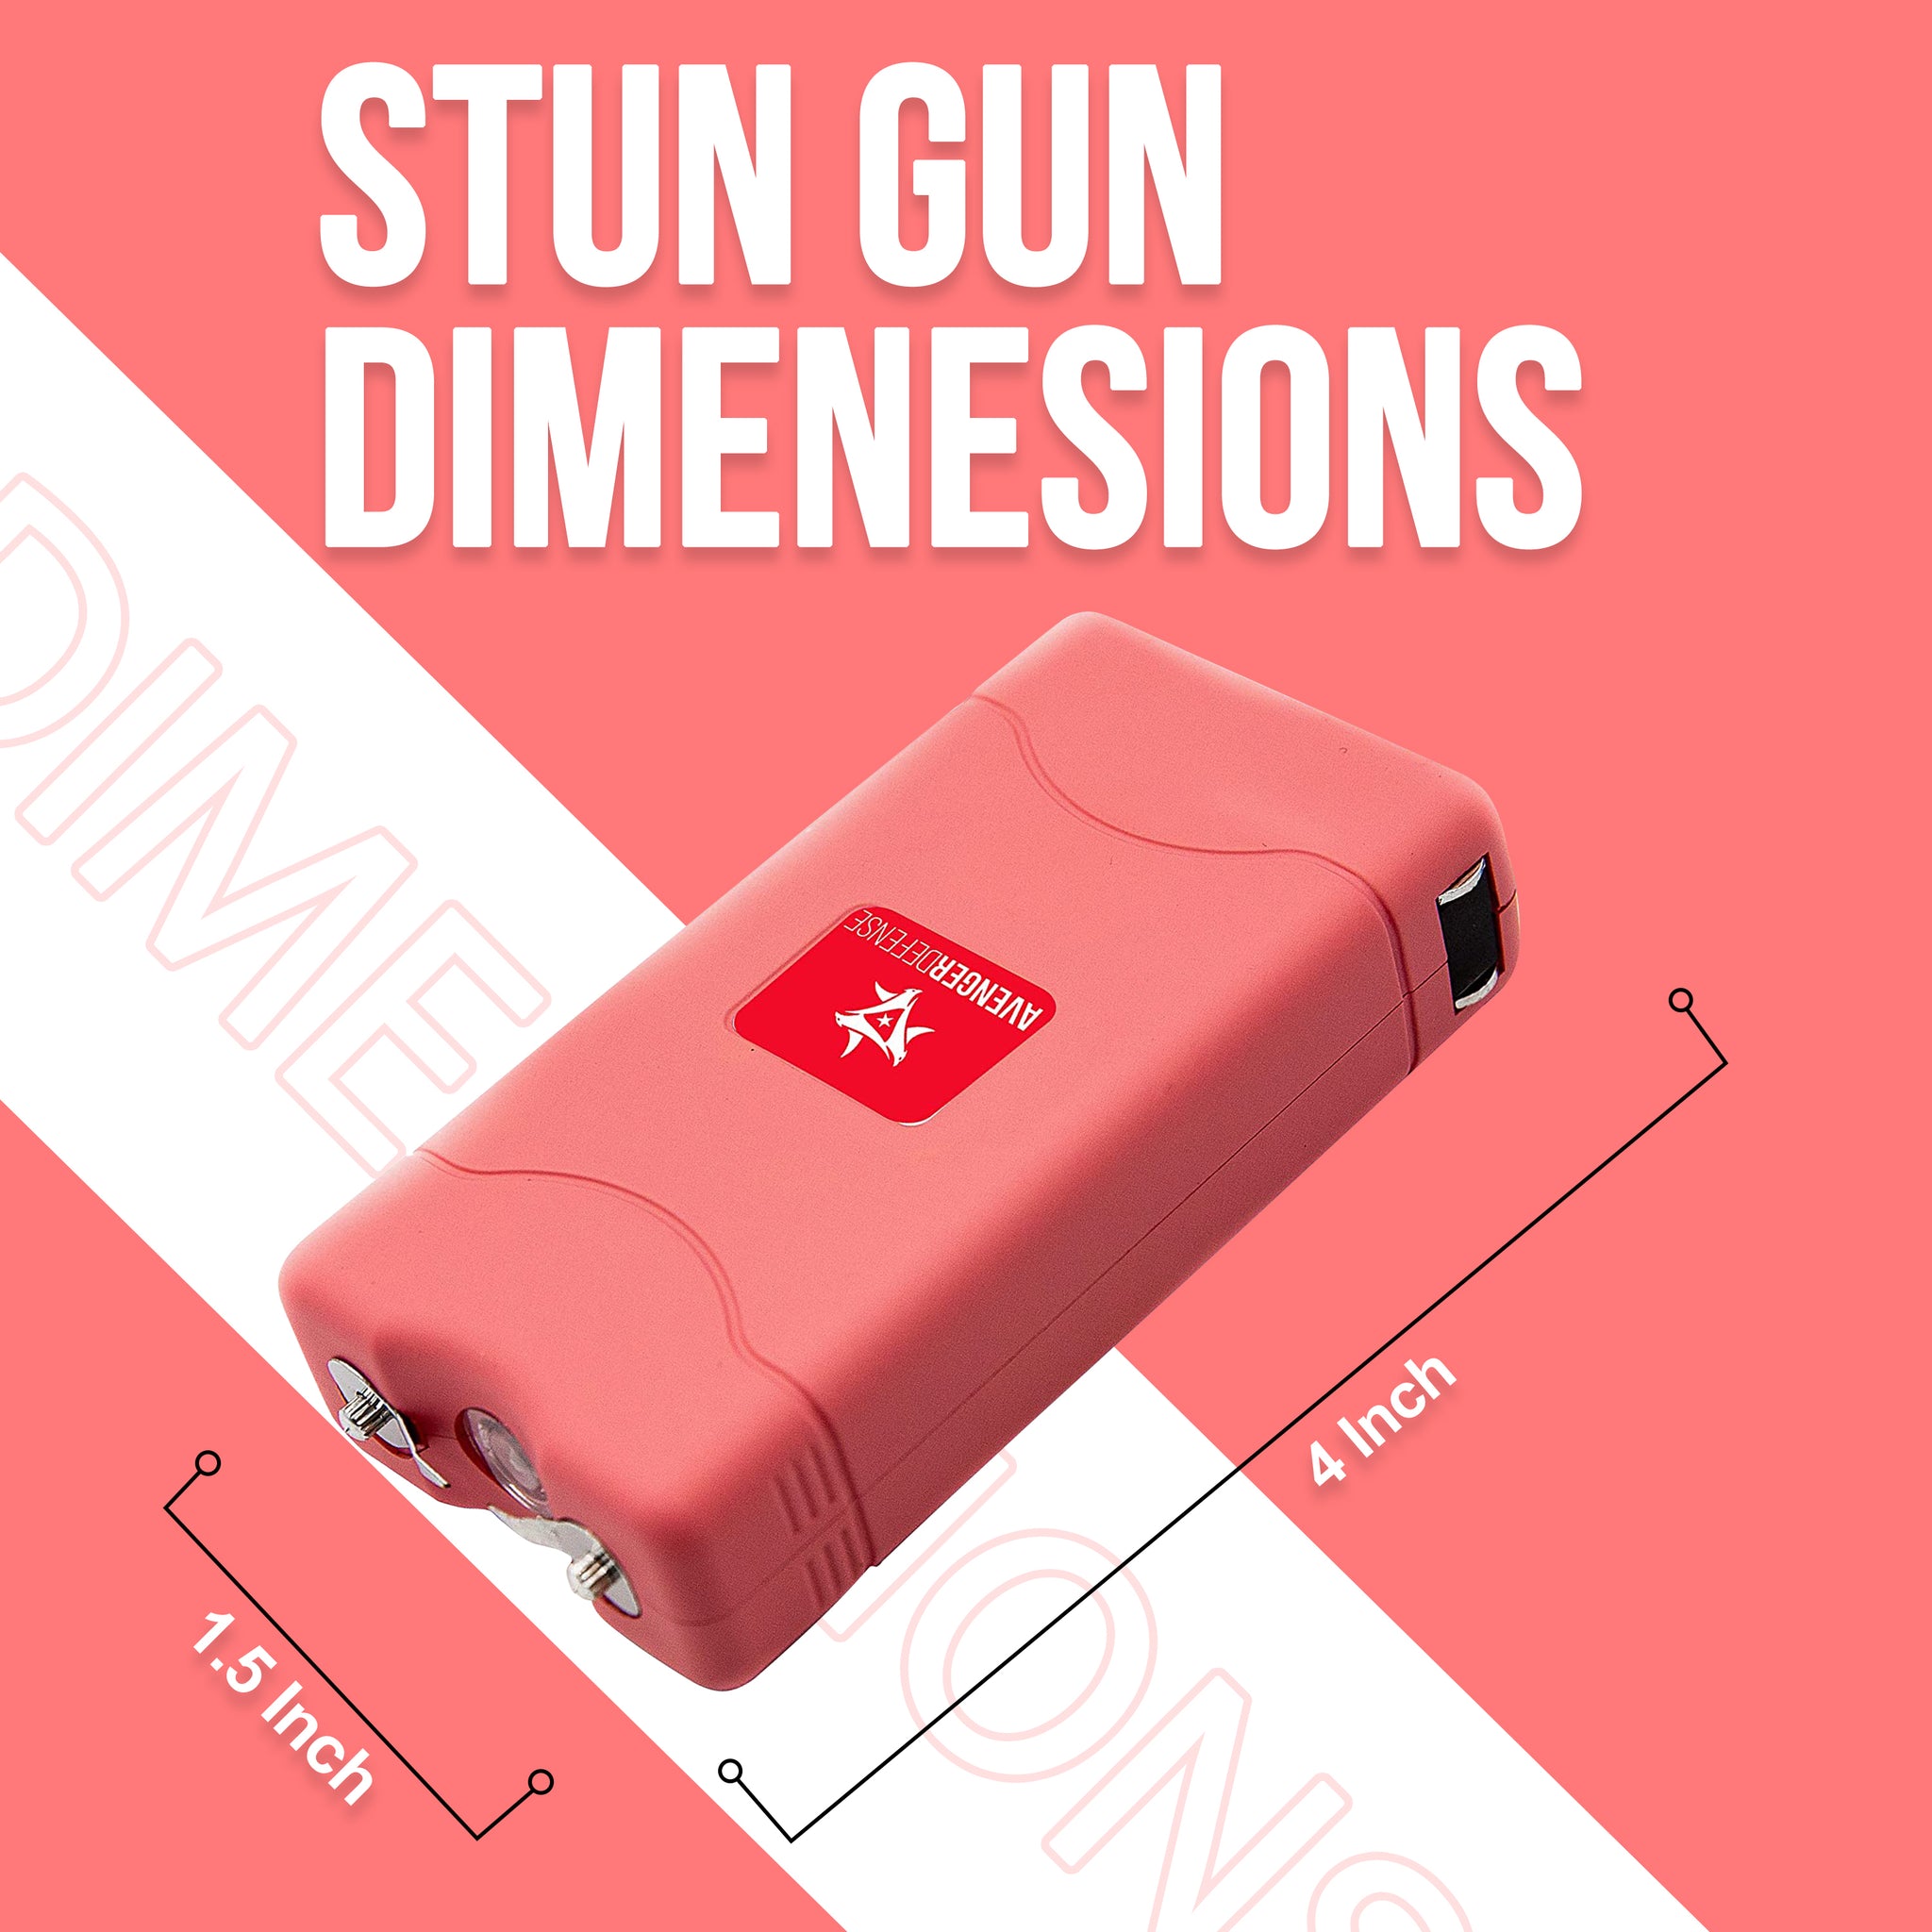 Mini Stun Gun –  Rechargeable 1.3 µC Charge Powerful – LED Flashlight and Carrying Case – Compact Design with Built in Plug, Pink,Black